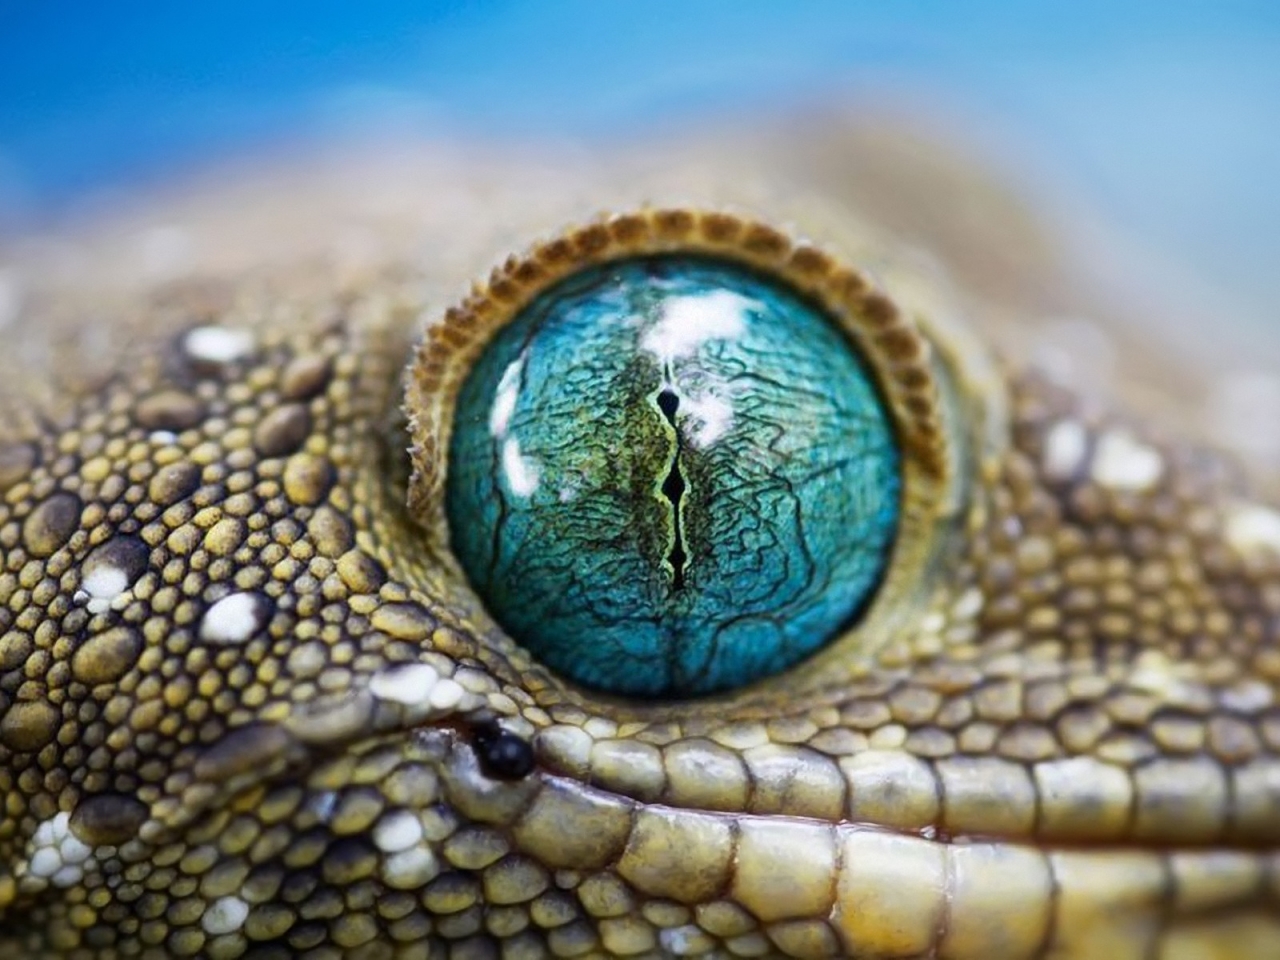 Blue Reptile Eye for 1280 x 960 resolution